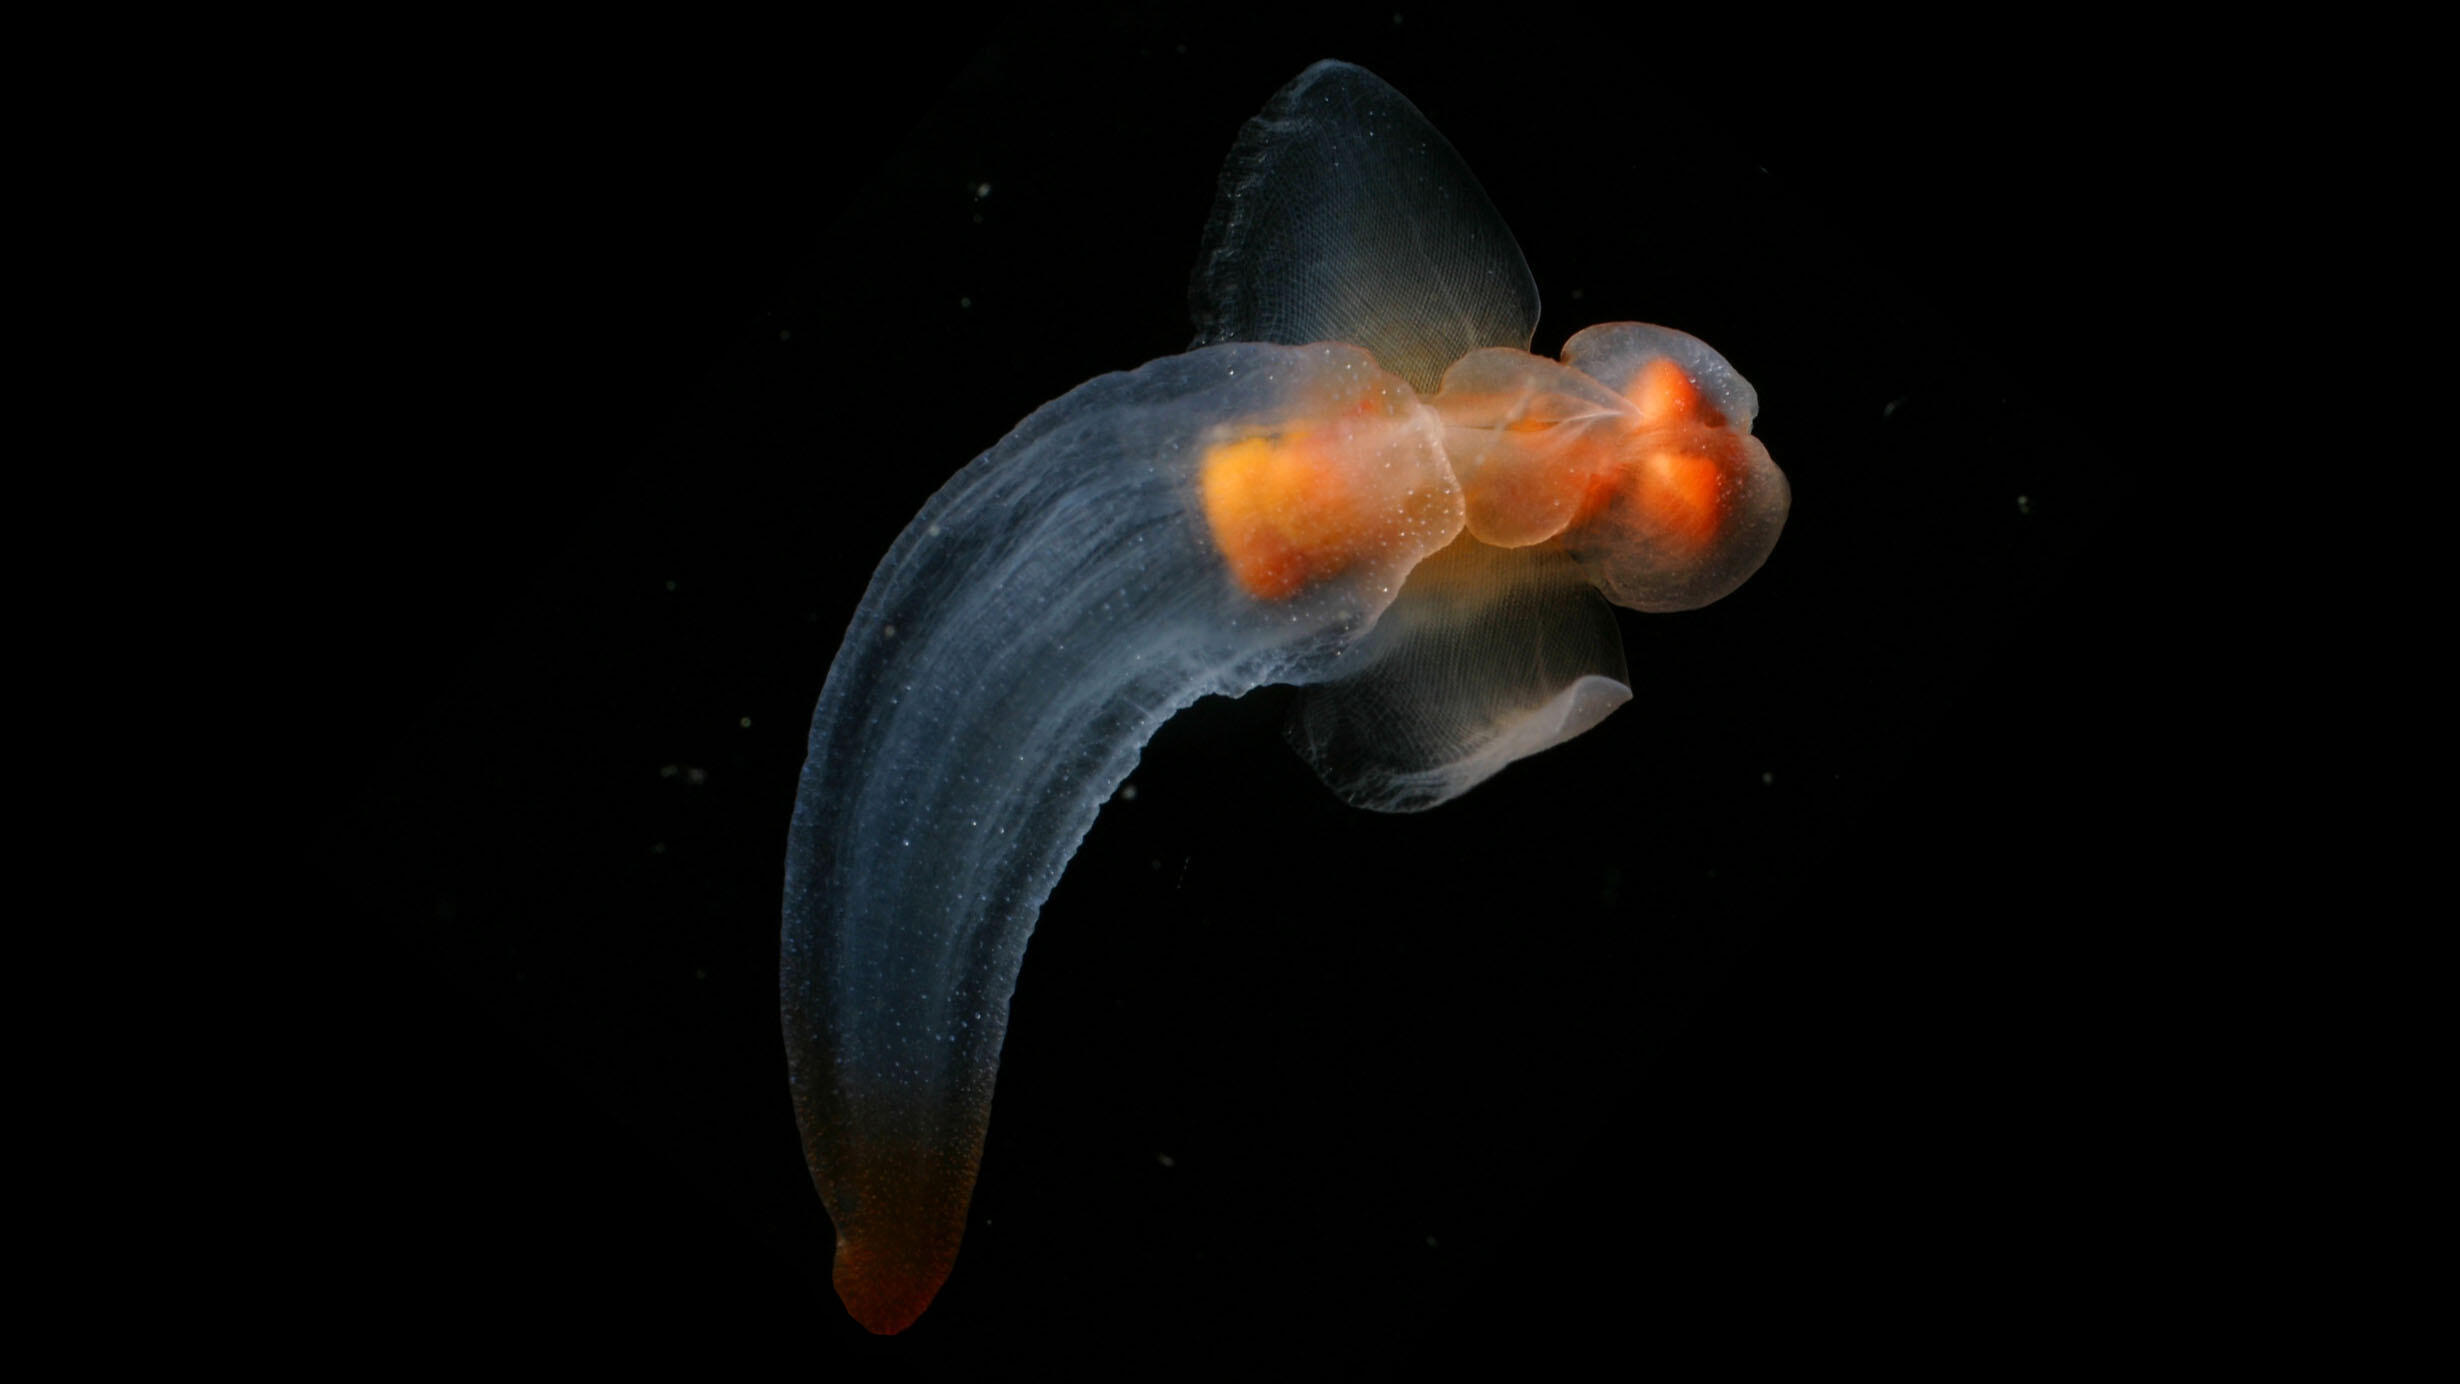 A shell-less snail (pteropod) glides through water.